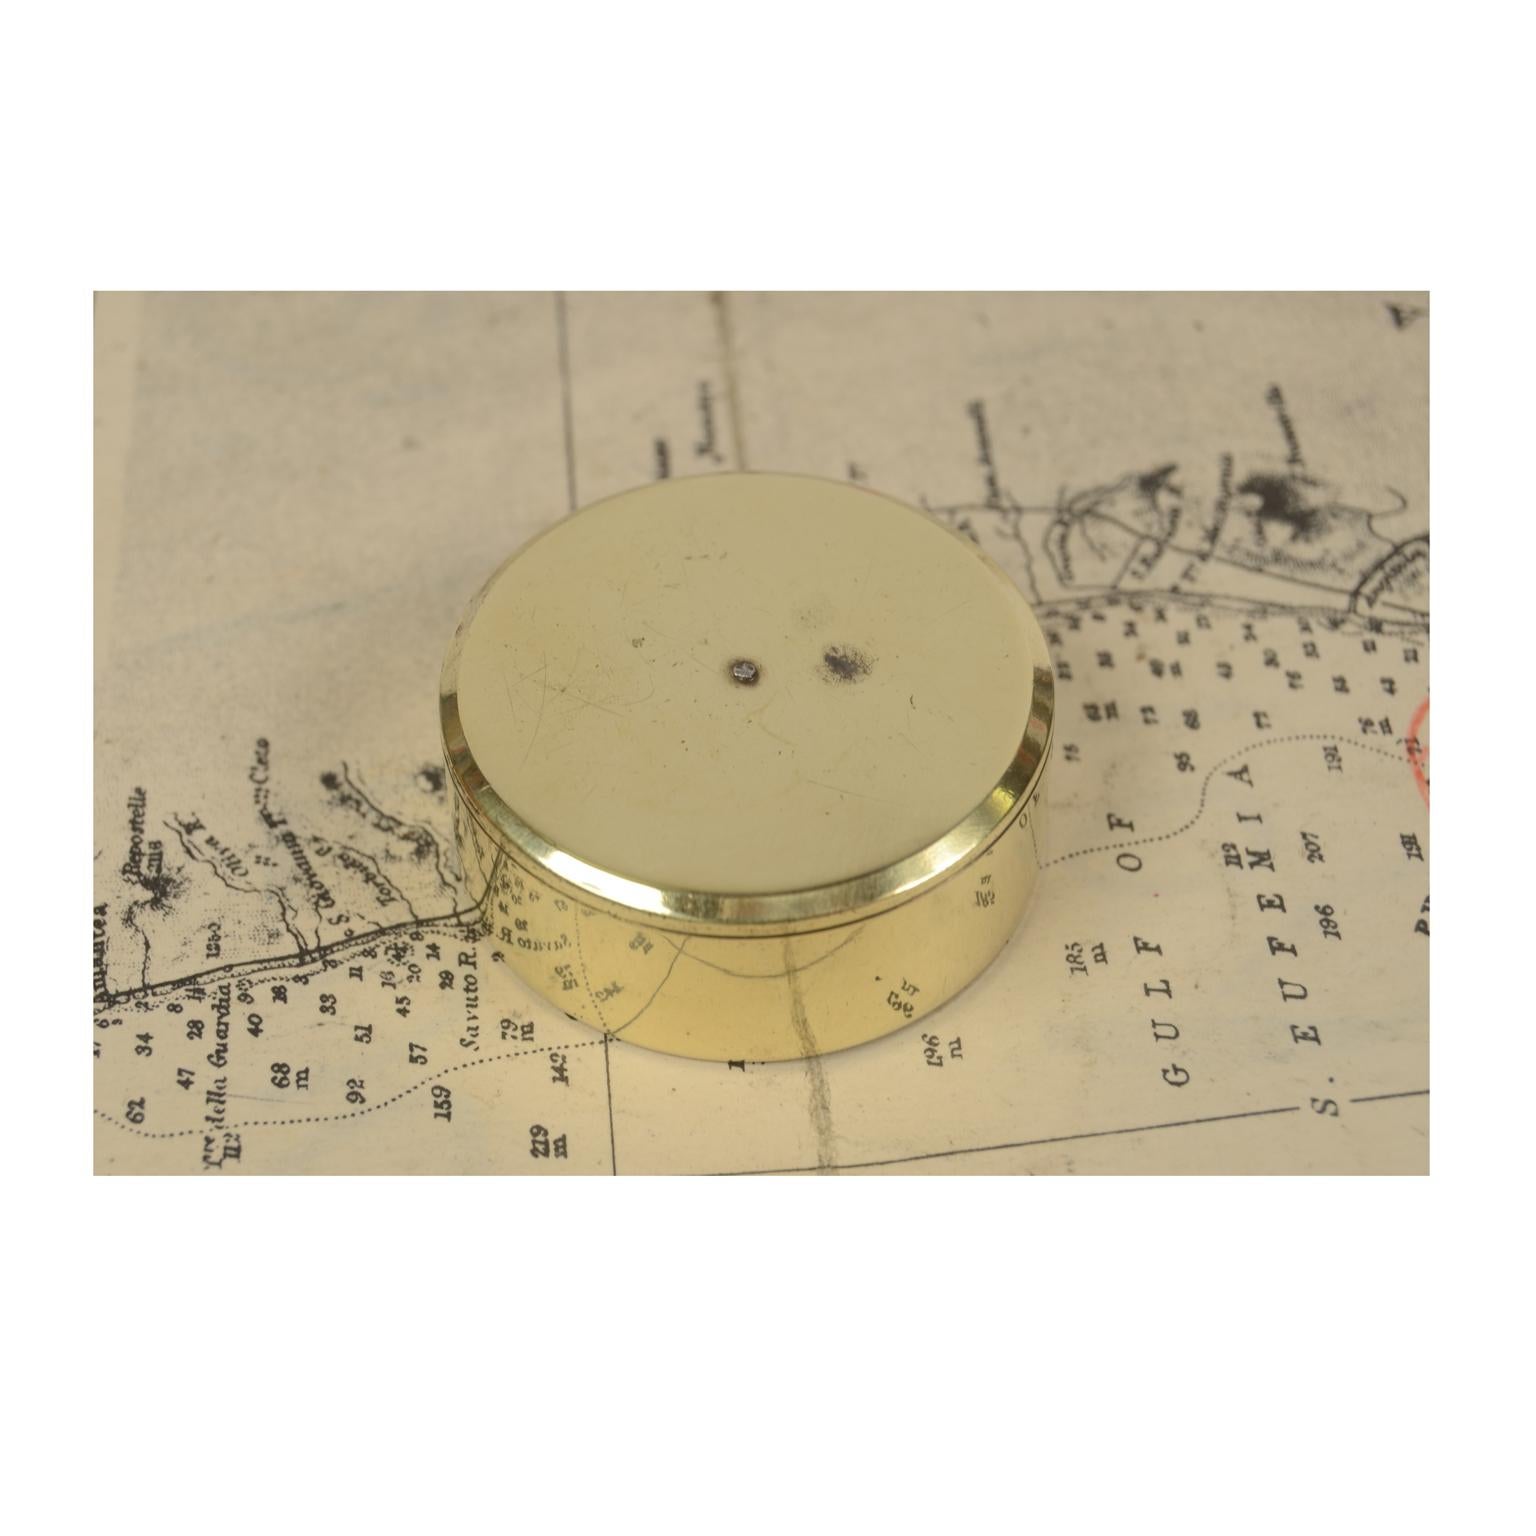 Nautical Brass Compass Made in the Mid-19th Century 1